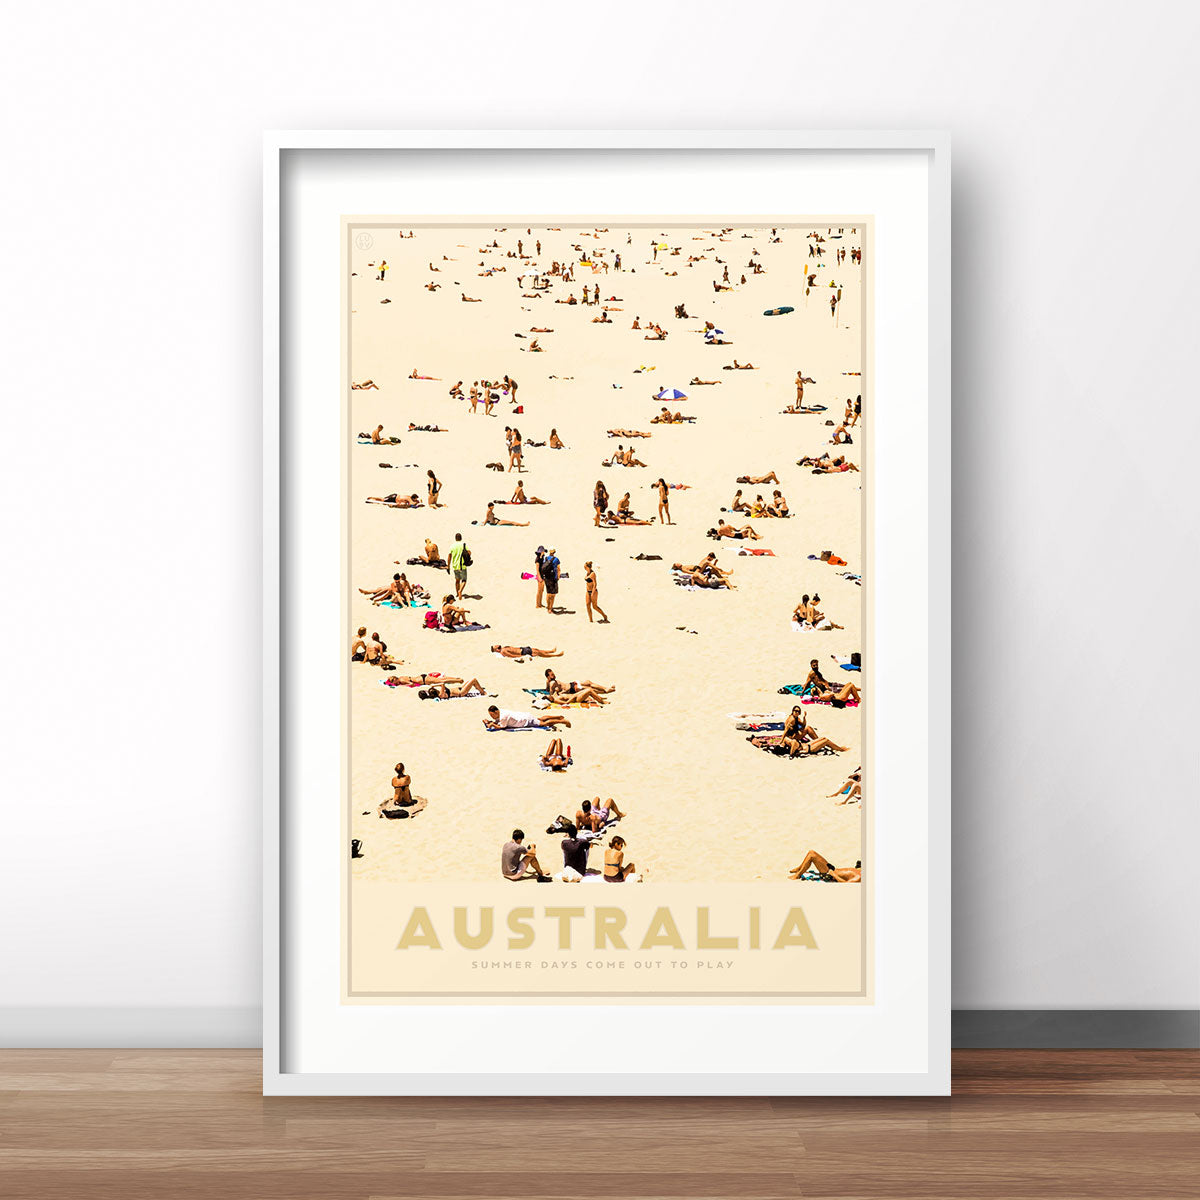 Australia Beach retro vintage print poster from Places We Luv